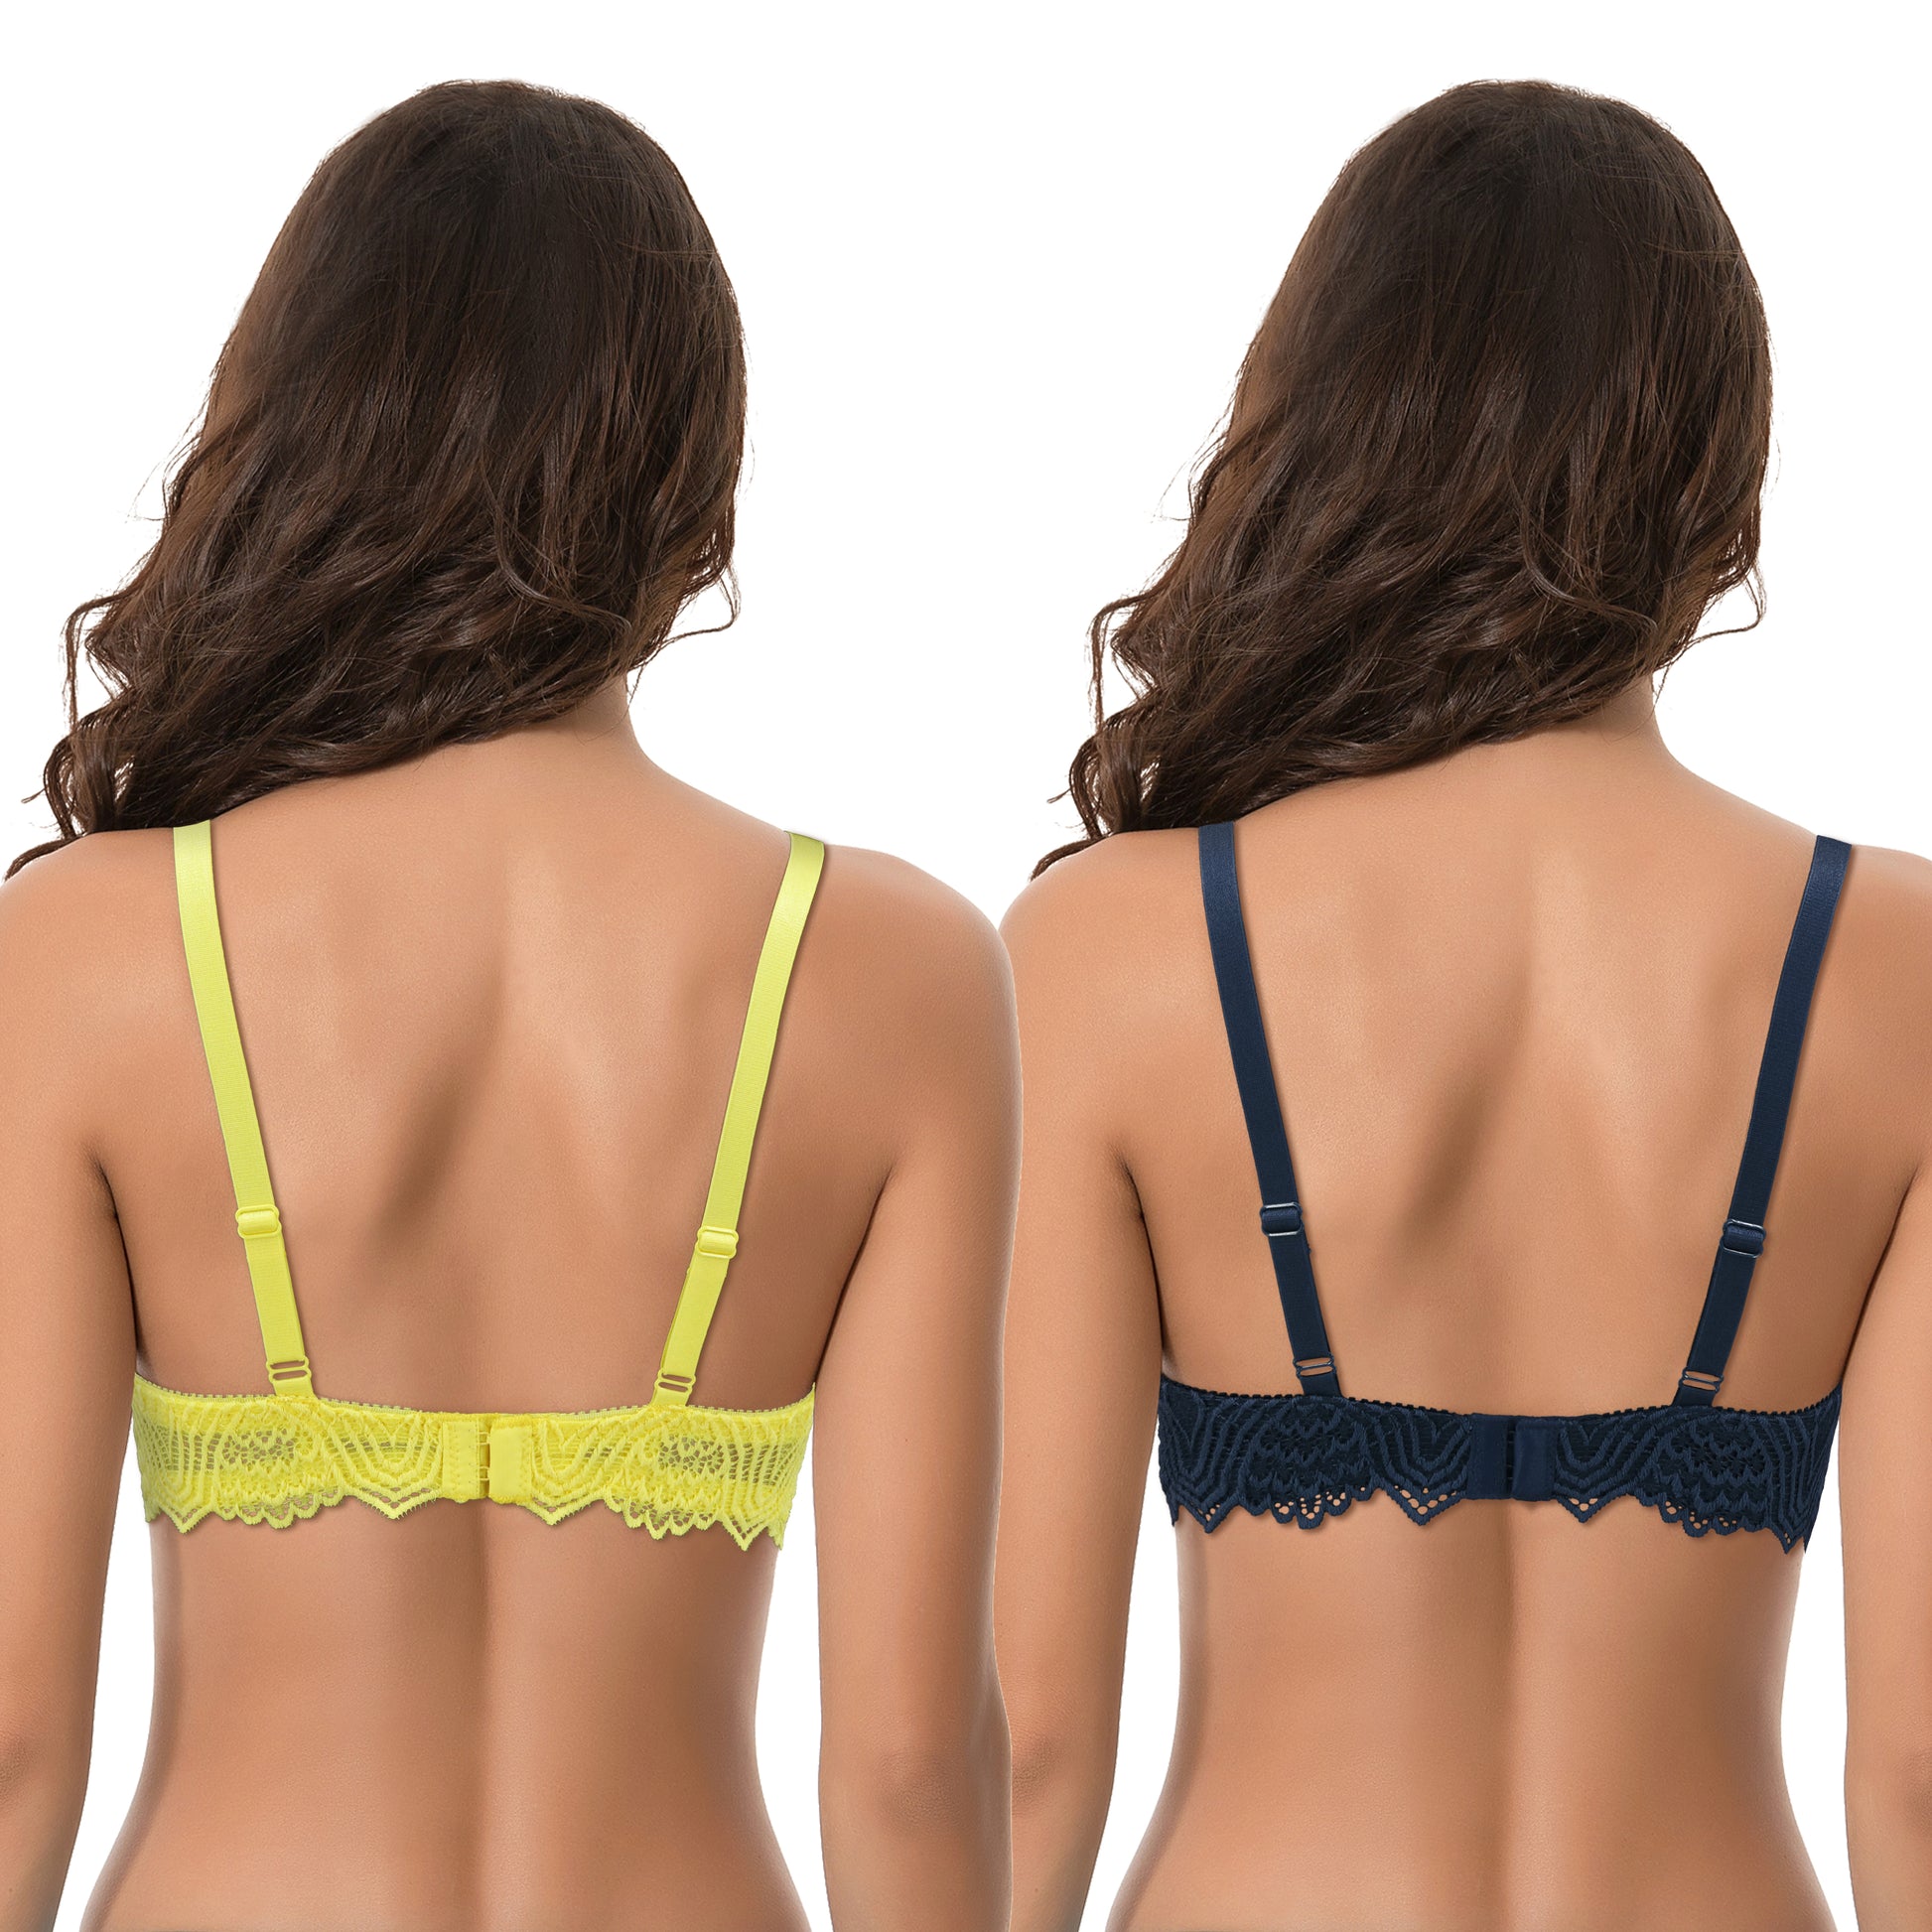 Curve Muse Women's Plus Size Push Up Add 1 Cup Underwire Perfect Shape Lace  Bras-2Pk-Navy,Yellow-42DD 